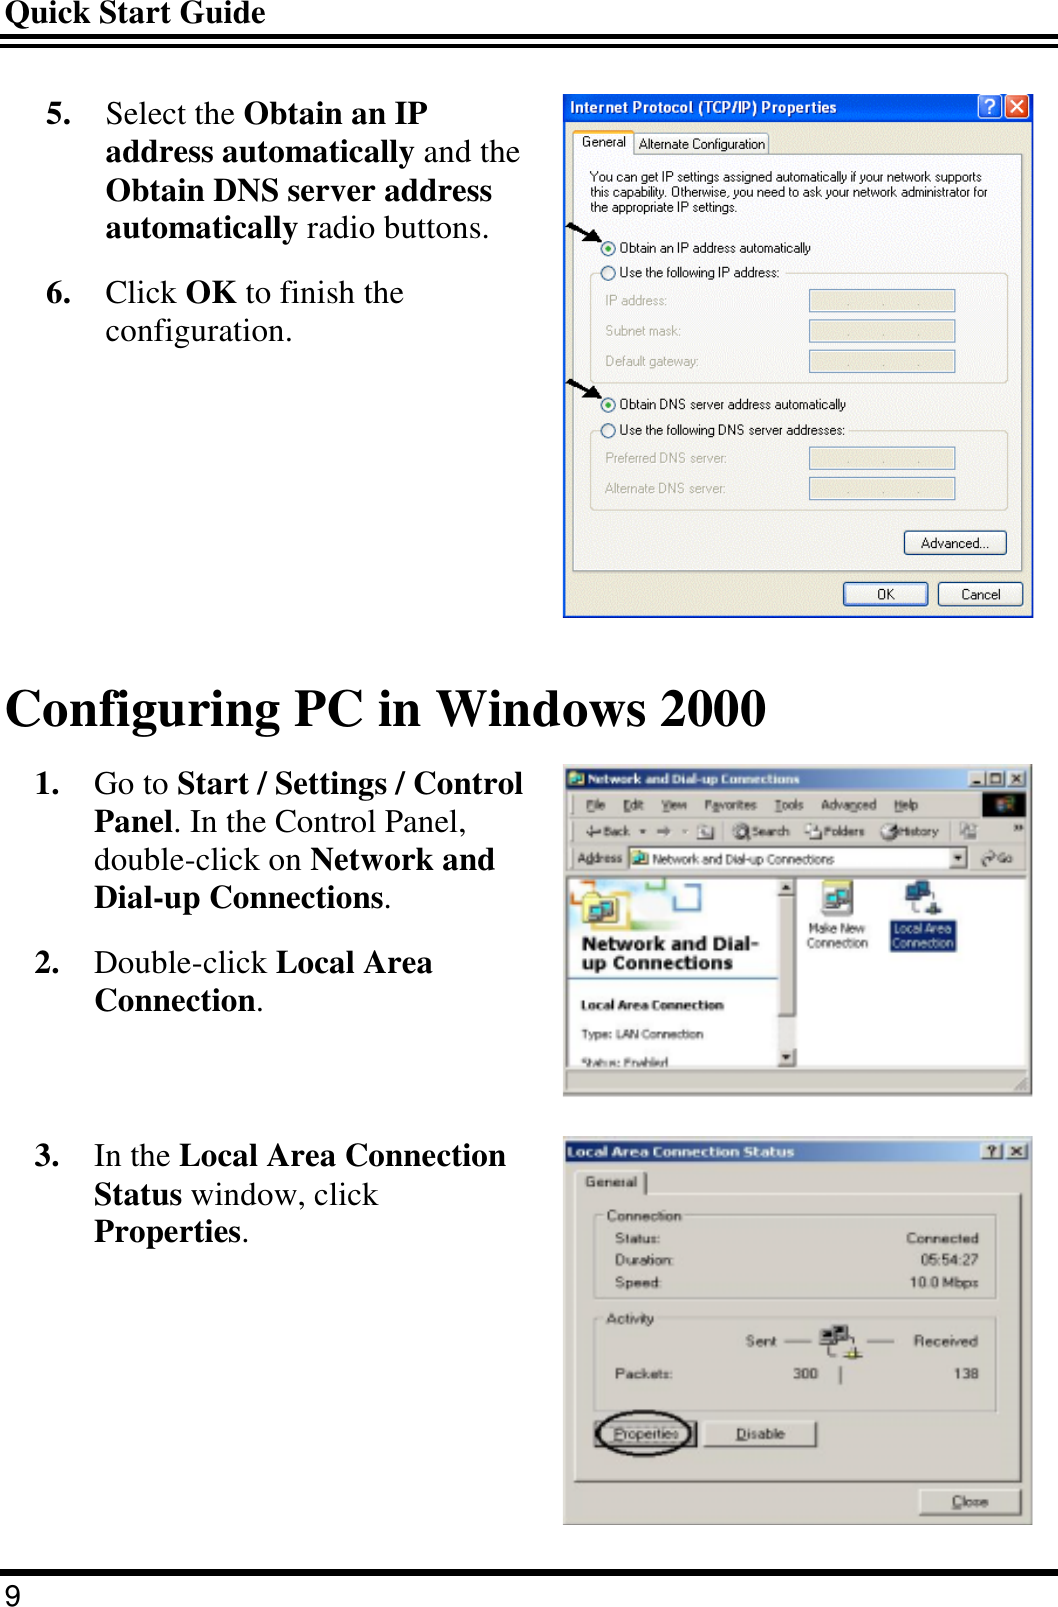 Quick Start Guide 9 5.  Select the Obtain an IP address automatically and the Obtain DNS server address automatically radio buttons. 6.  Click OK to finish the configuration.  Configuring PC in Windows 2000 1.  Go to Start / Settings / Control Panel. In the Control Panel, double-click on Network and Dial-up Connections. 2.  Double-click Local Area Connection.  3.  In the Local Area Connection Status window, click Properties.  